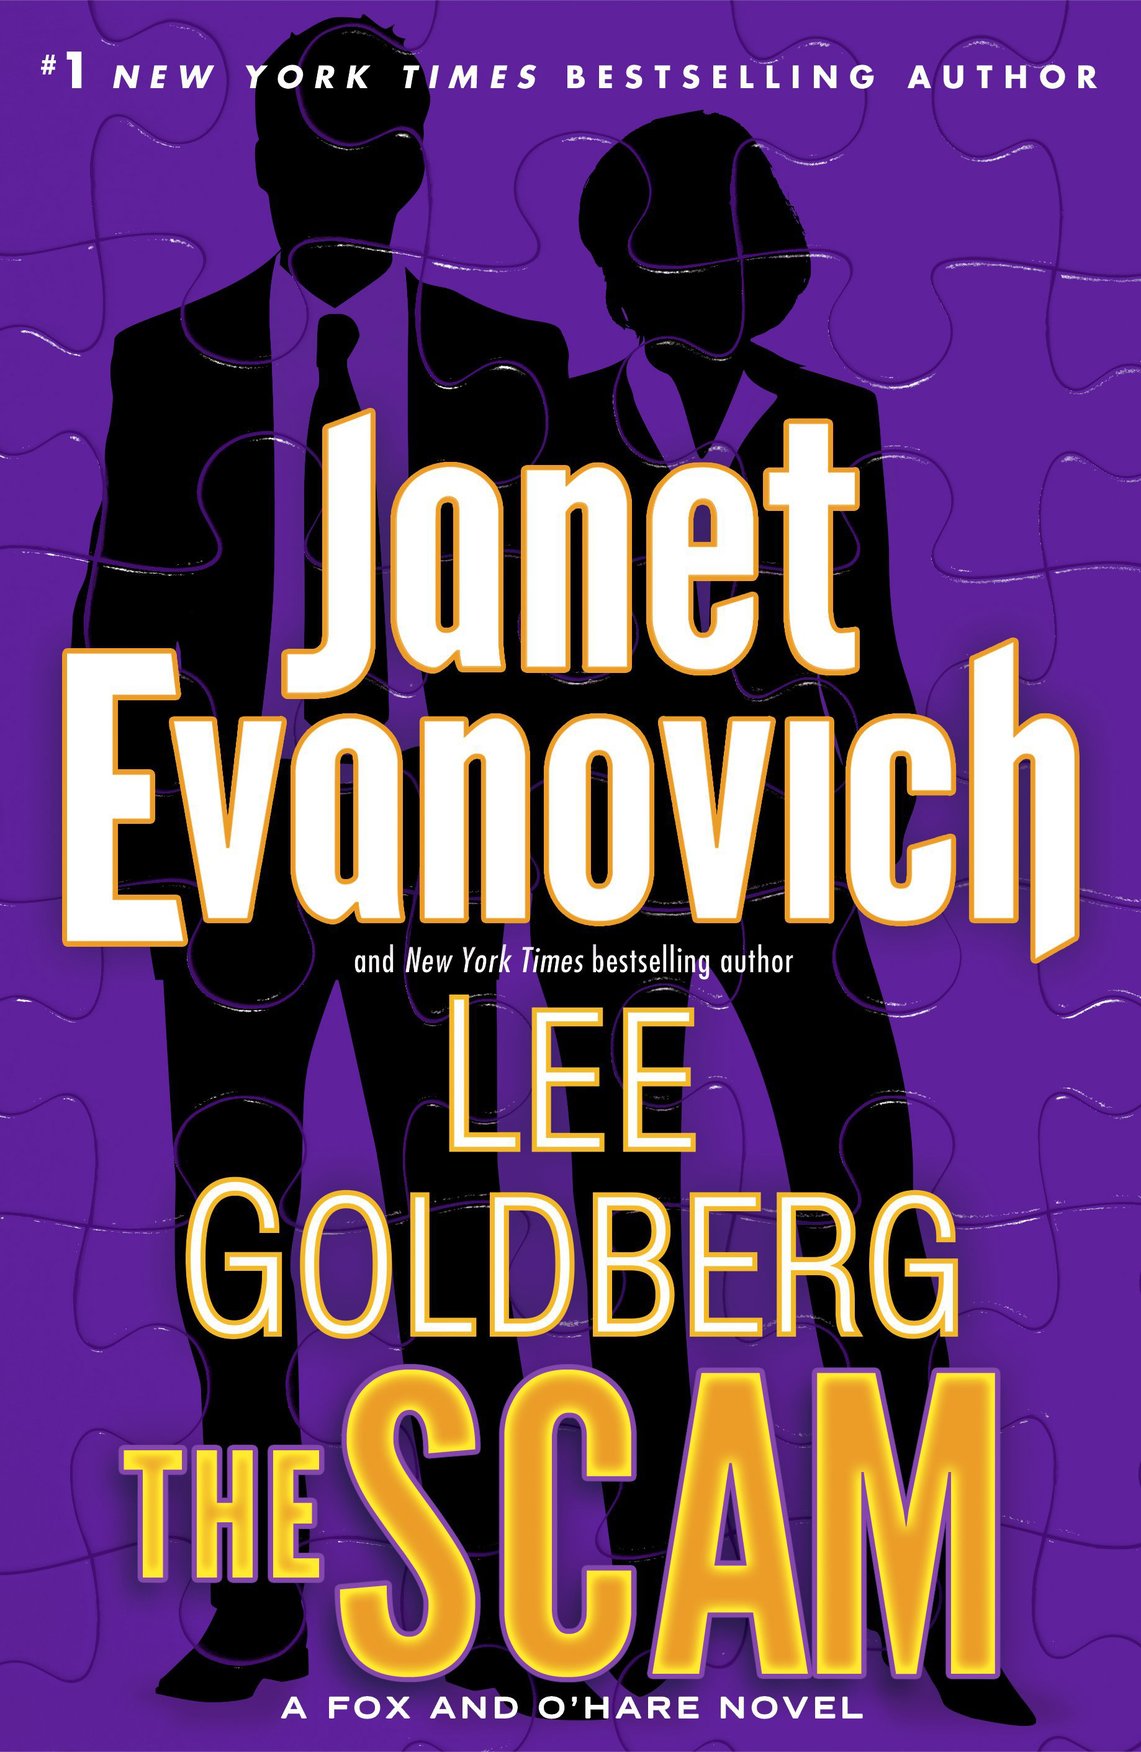 The Scam (2015) by Janet Evanovich